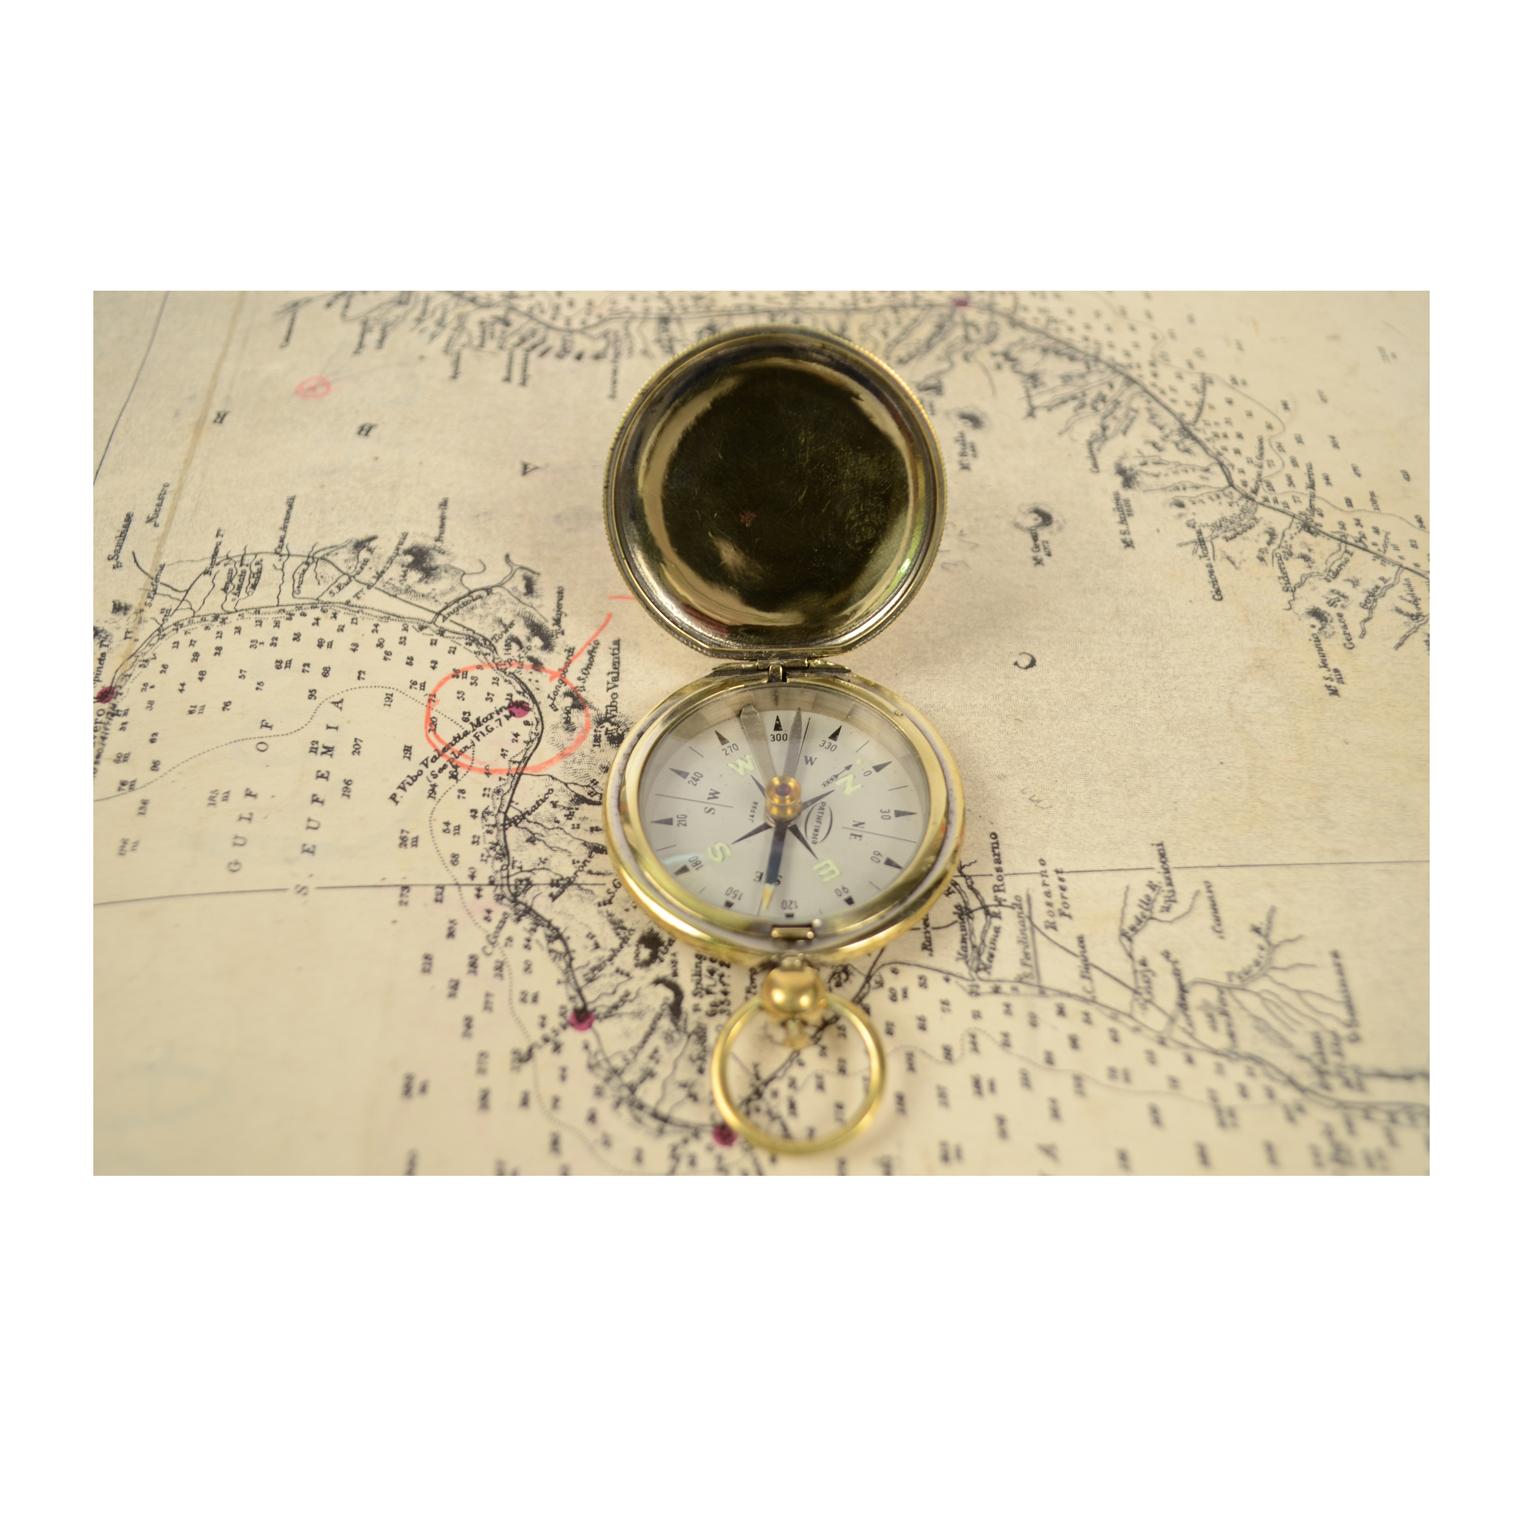 Japanese Pocket Compass Signed by Pathfinder Japan Made of Brass